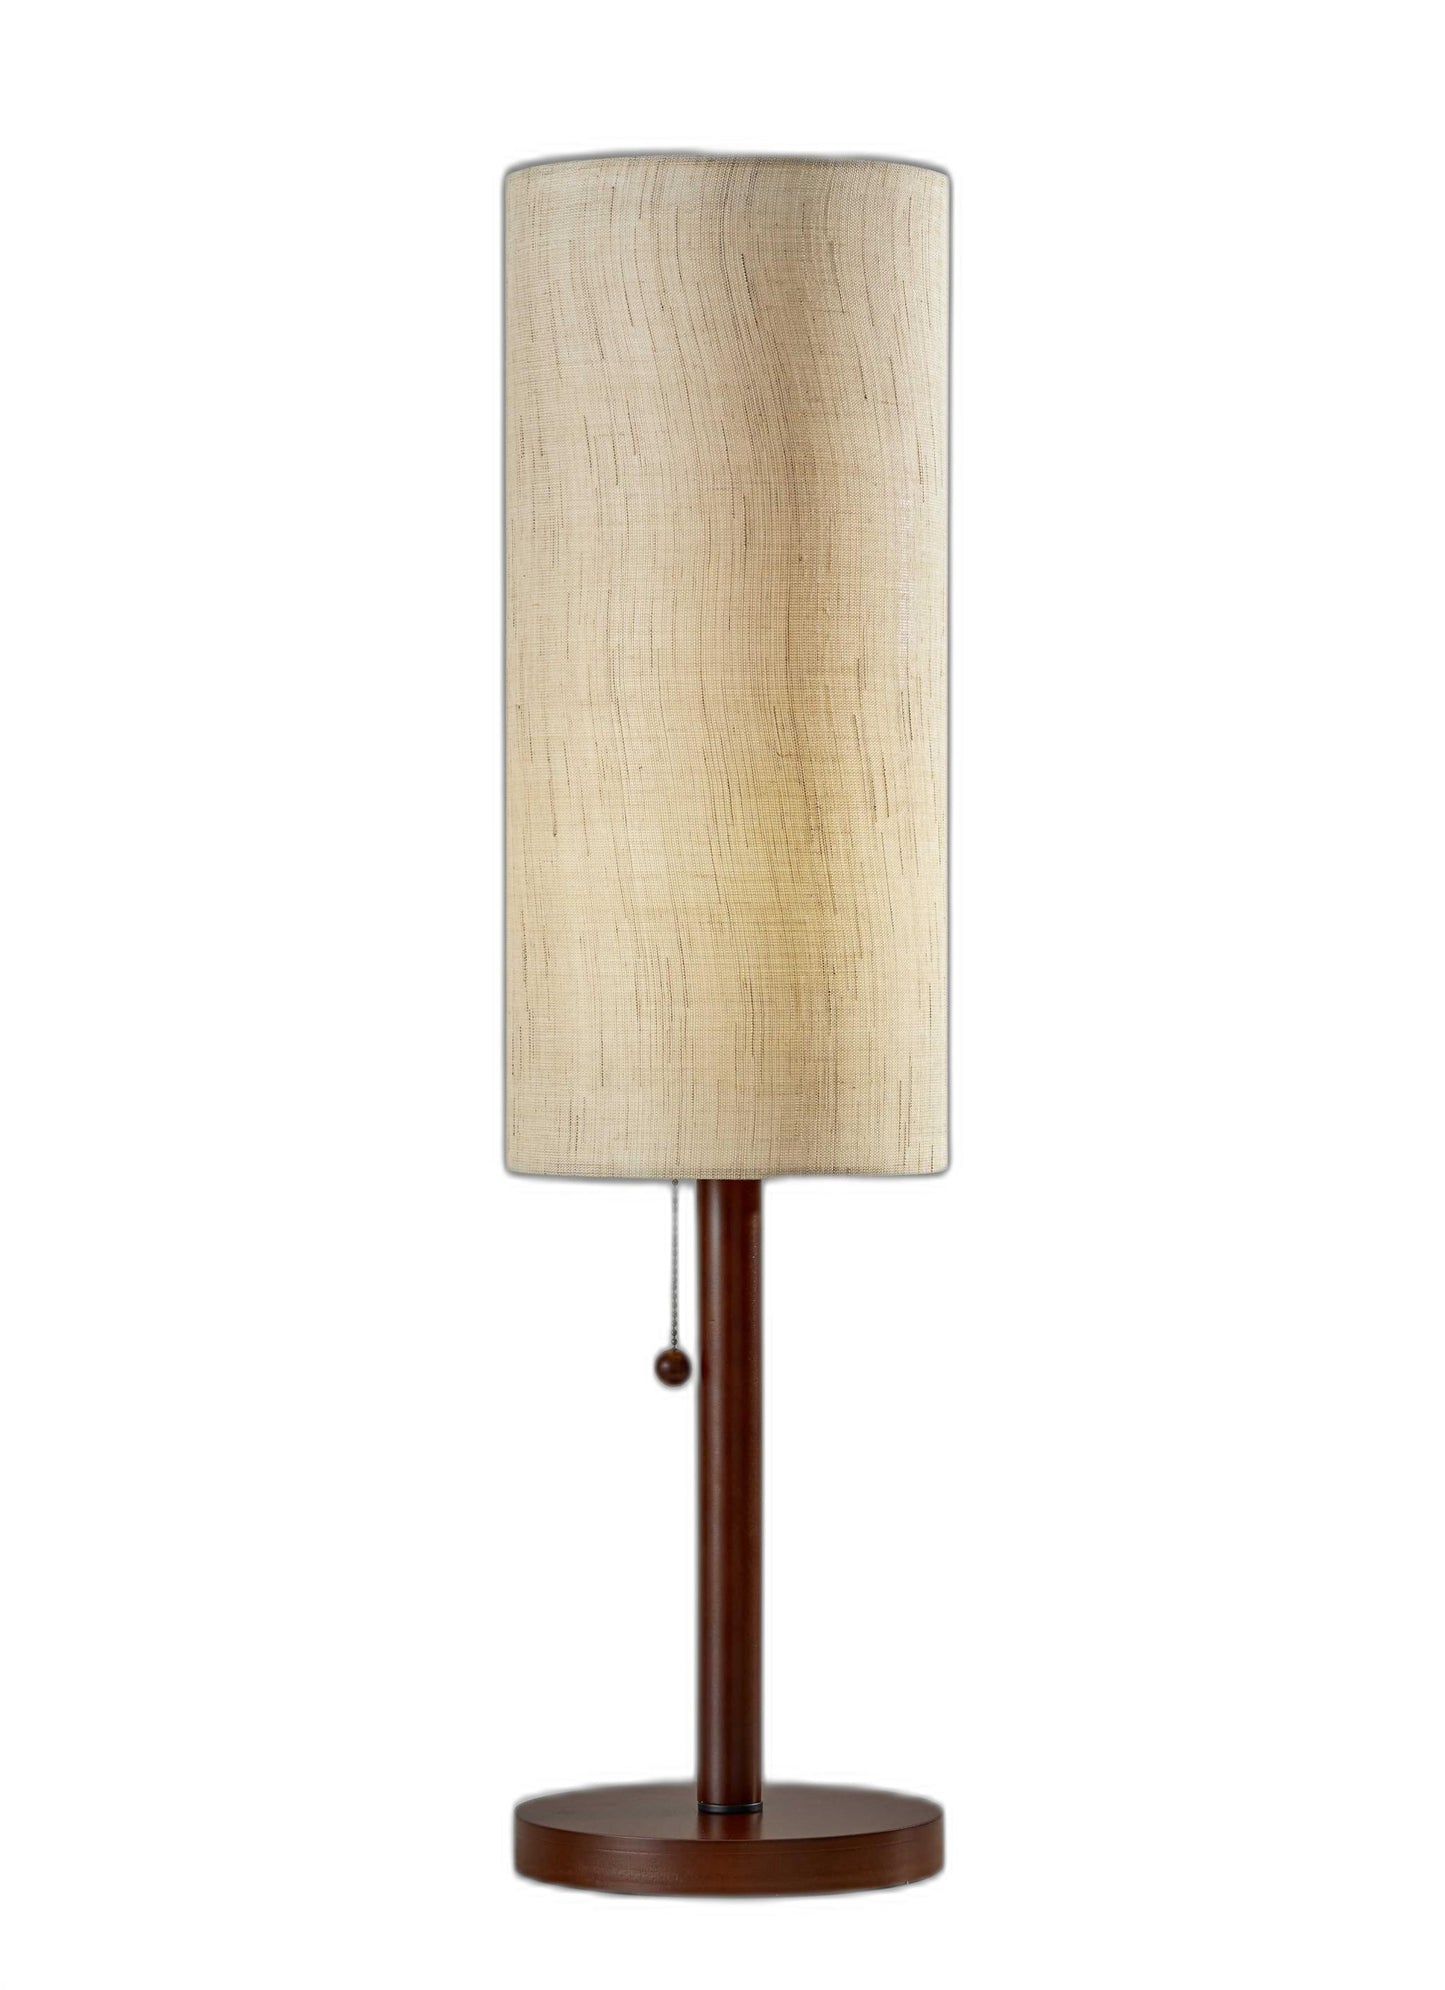 31" Walnut Solid Wood Standard Table Lamp With Beige Shade